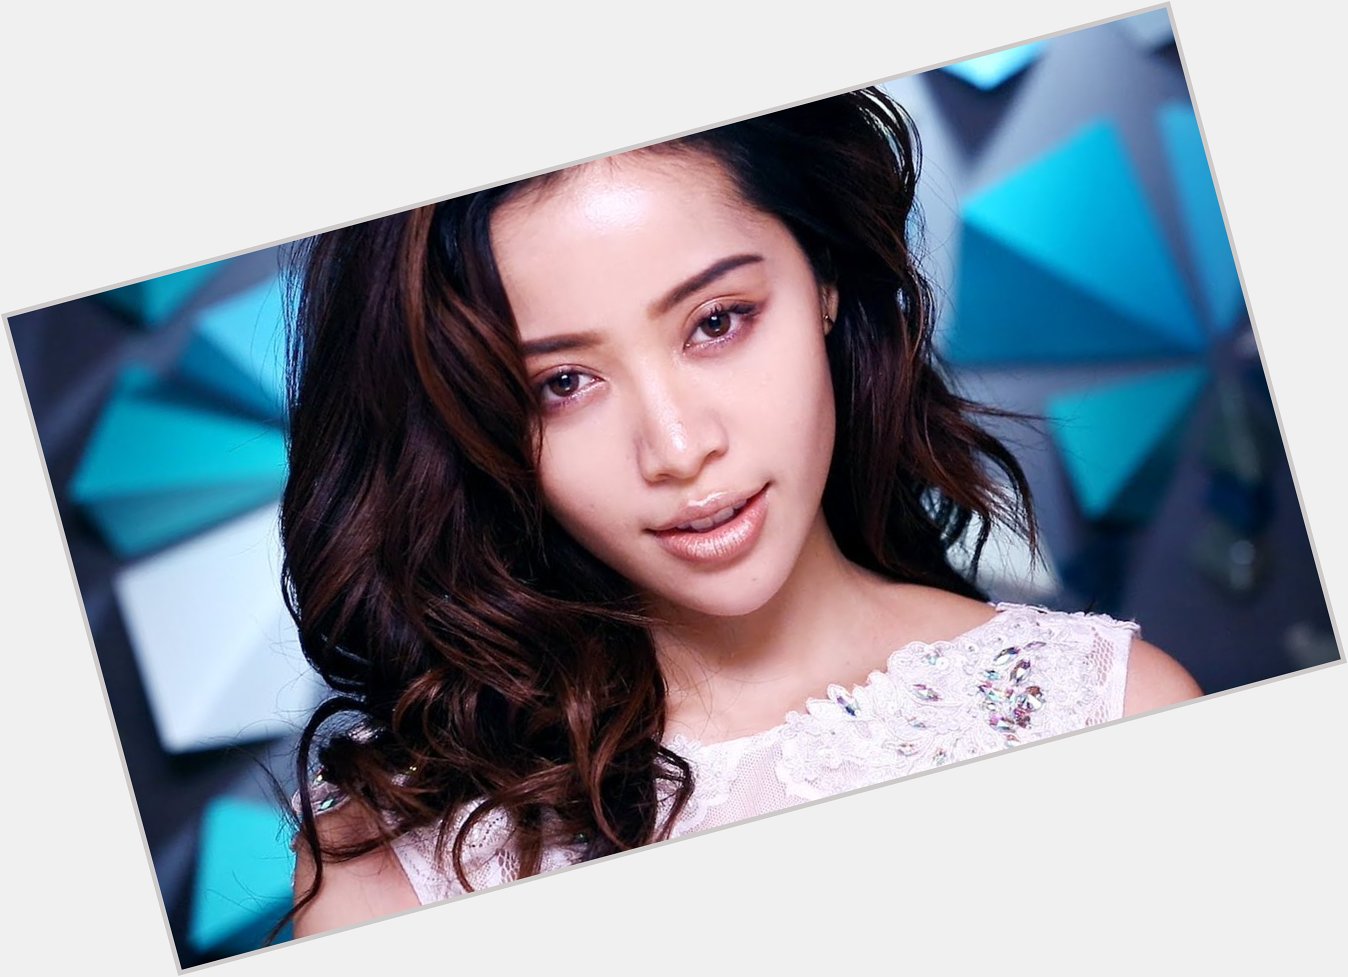 Happy Birthday to makeup artist and Youtuber Michelle Phan!

Her looks always stun. 